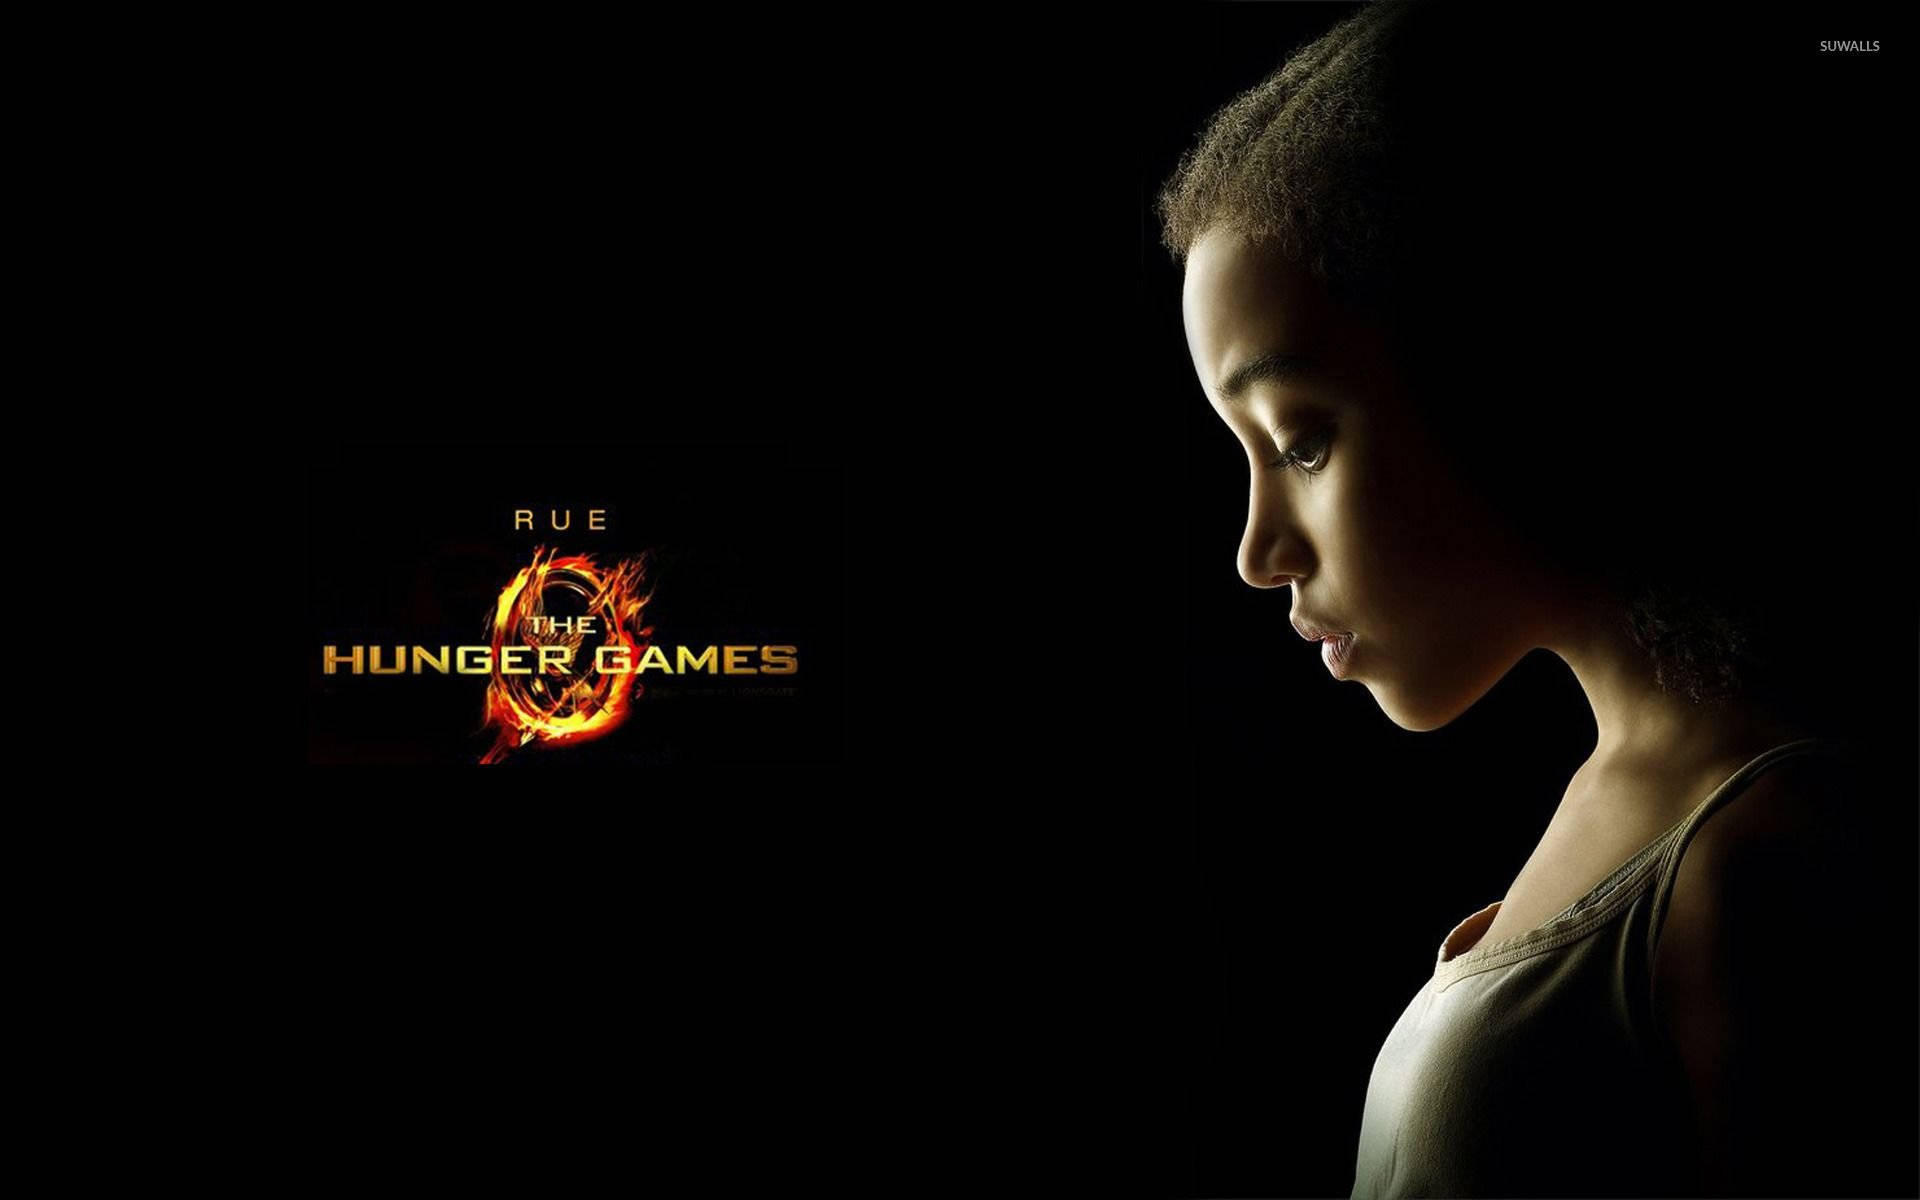 The Hunger Games Rue Poster